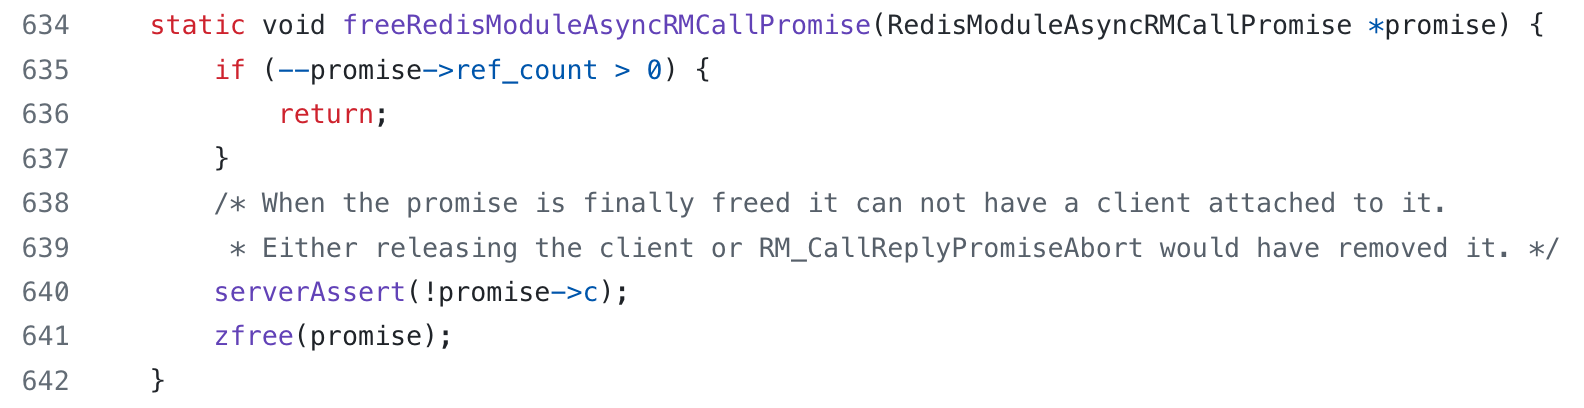 A function in the Redis source code where it makes an assertion that might be questioned. The line with the assertion has a comment explaining why the assertion should be correct.